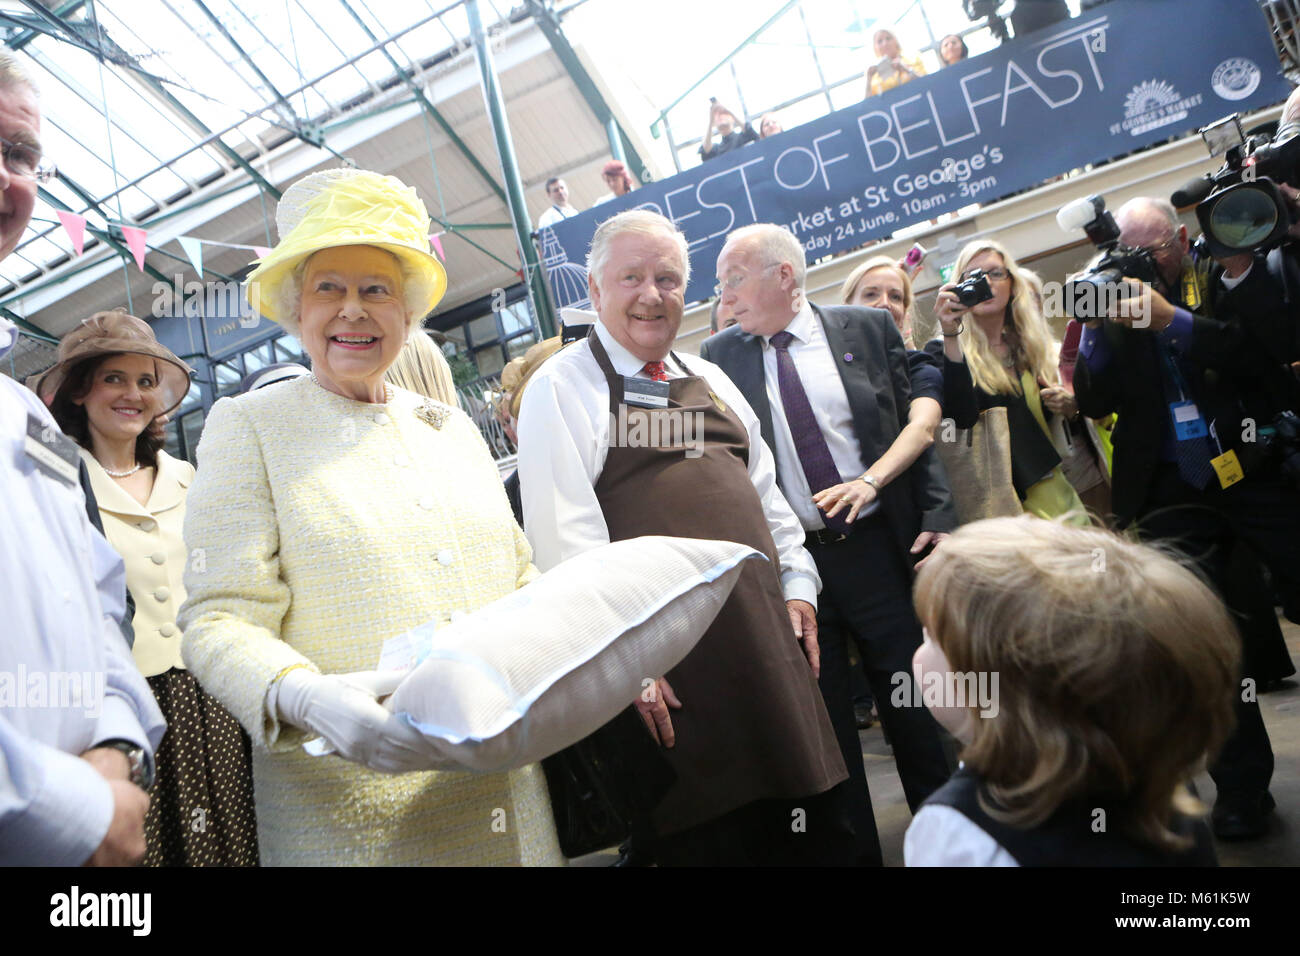 Queen Elizabeth II is presented with a cushion for Prince George by 3 year old Jack Morgan at St George's indoor market on June 24, 2014 in Belfast, Northern Ireland. The Royal party are visiting Northern Ireland for three days. Pool Photo/Paul McErlane Stock Photo